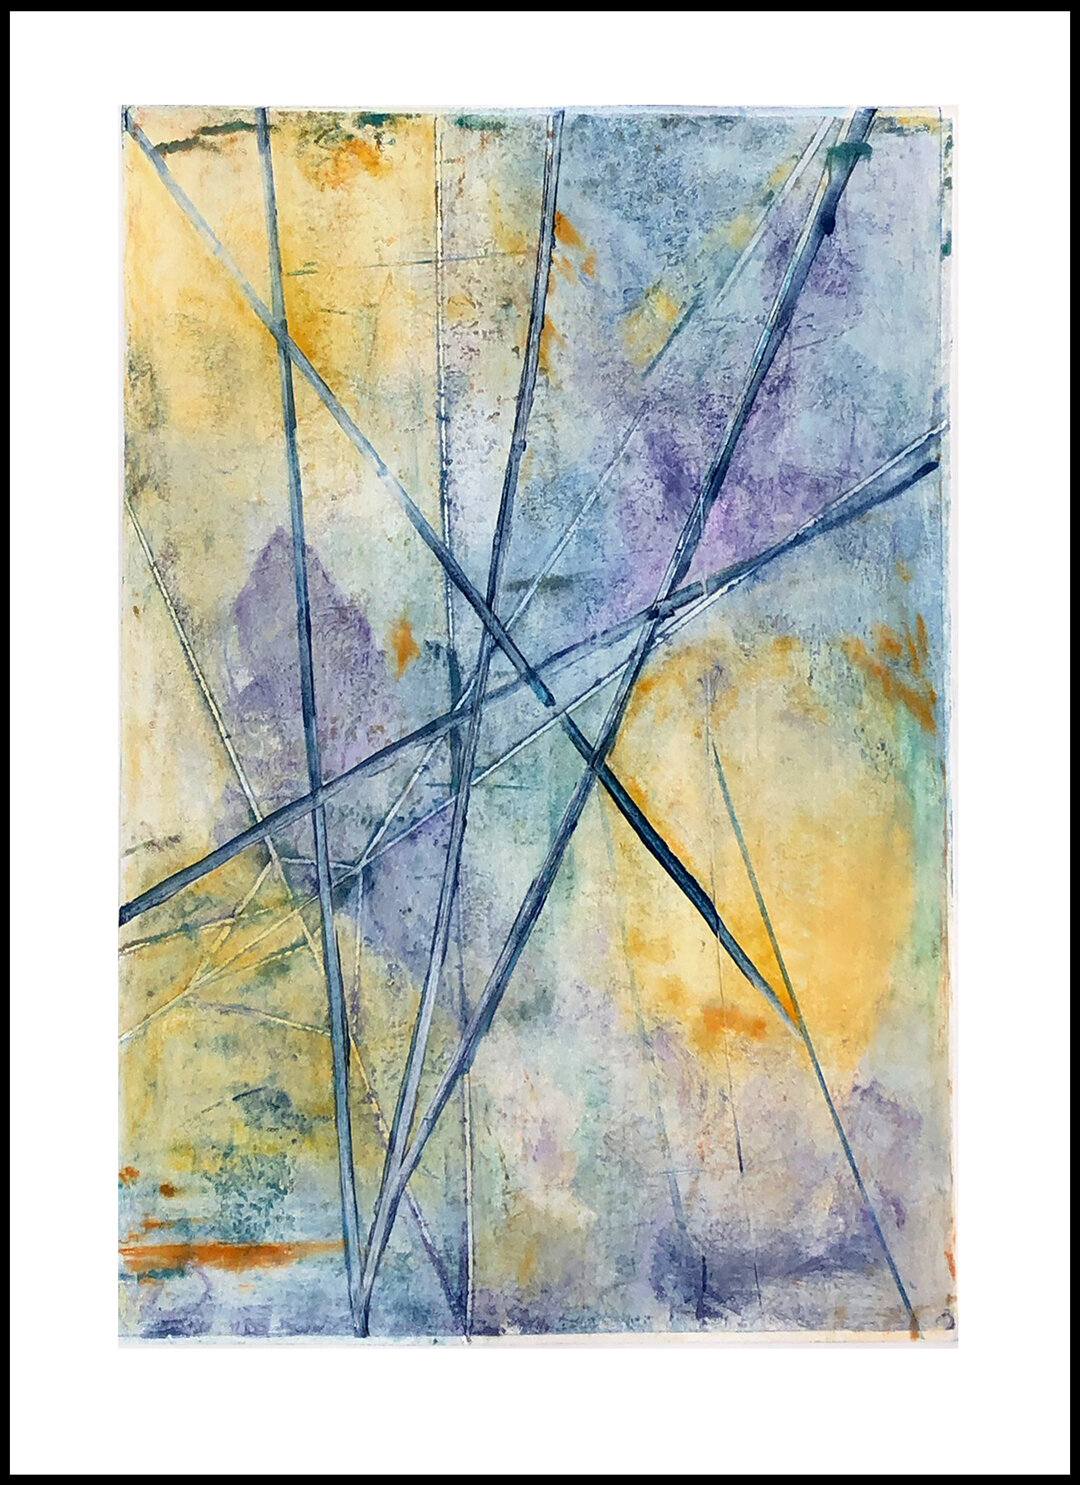    Know Your Path   Crossroads and detours, steps forward to new experiences guided by what you know as truth. Mixed Media Monoprint, 22 x 30 inches, 1/1   $160   